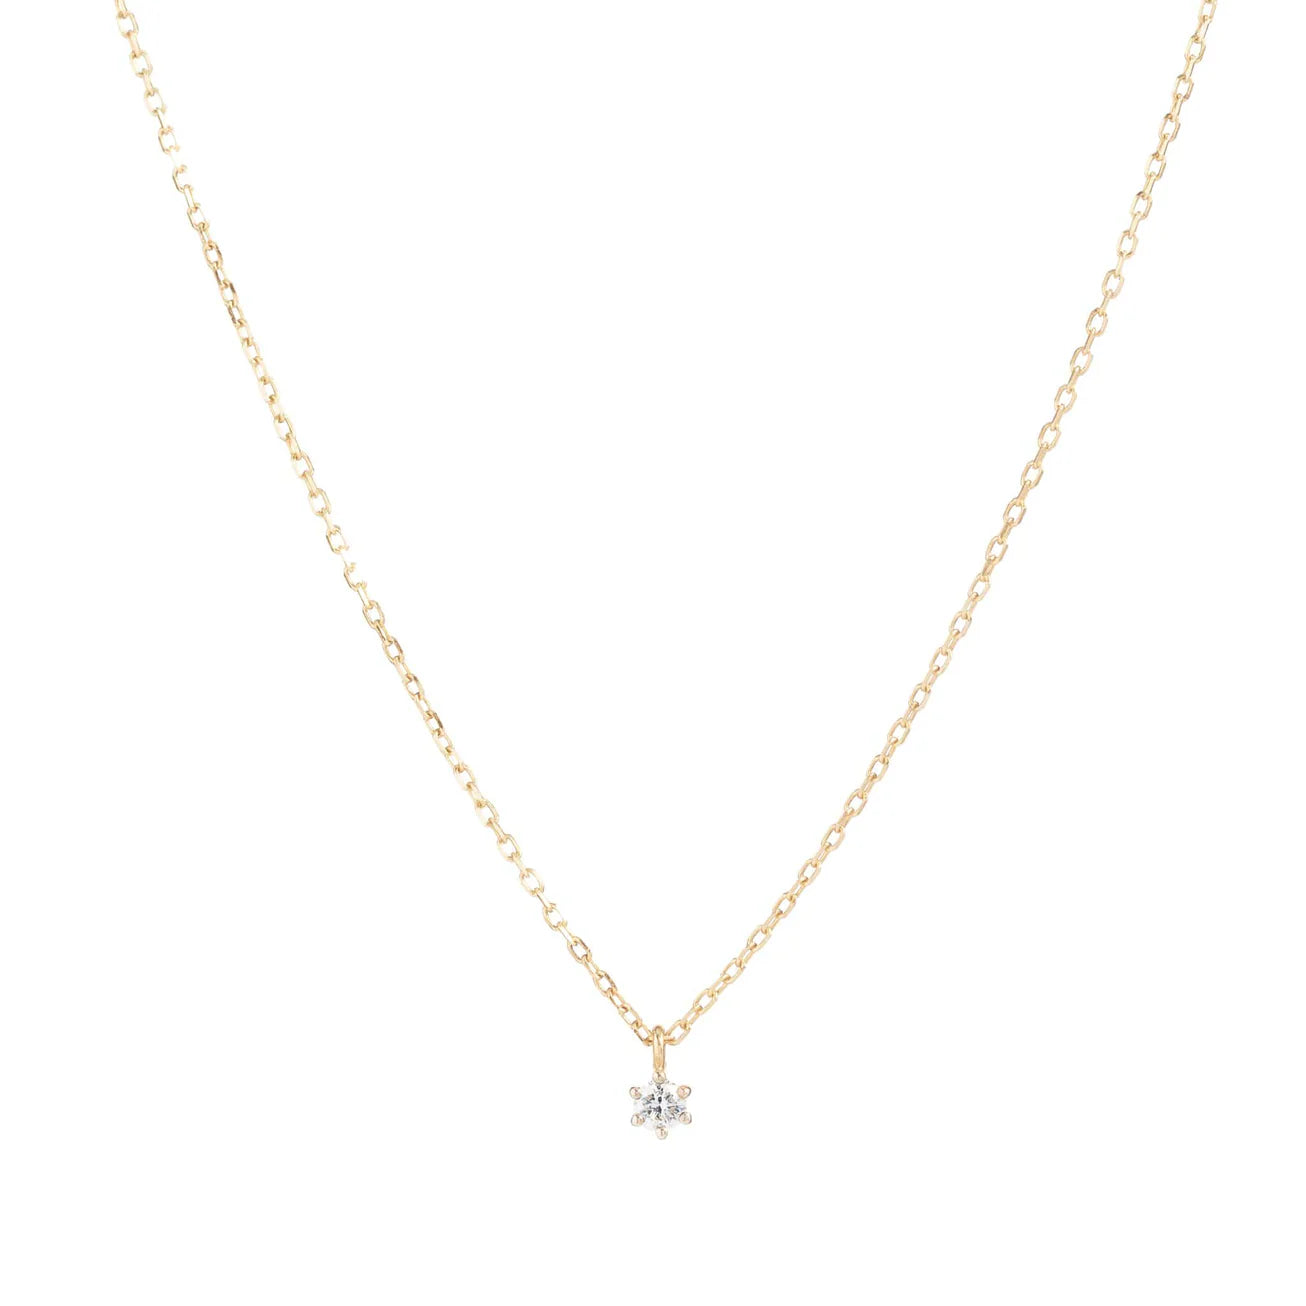 By Charlotte 14K GOLD SWEET DROPLET DIAMOND NECKLACE